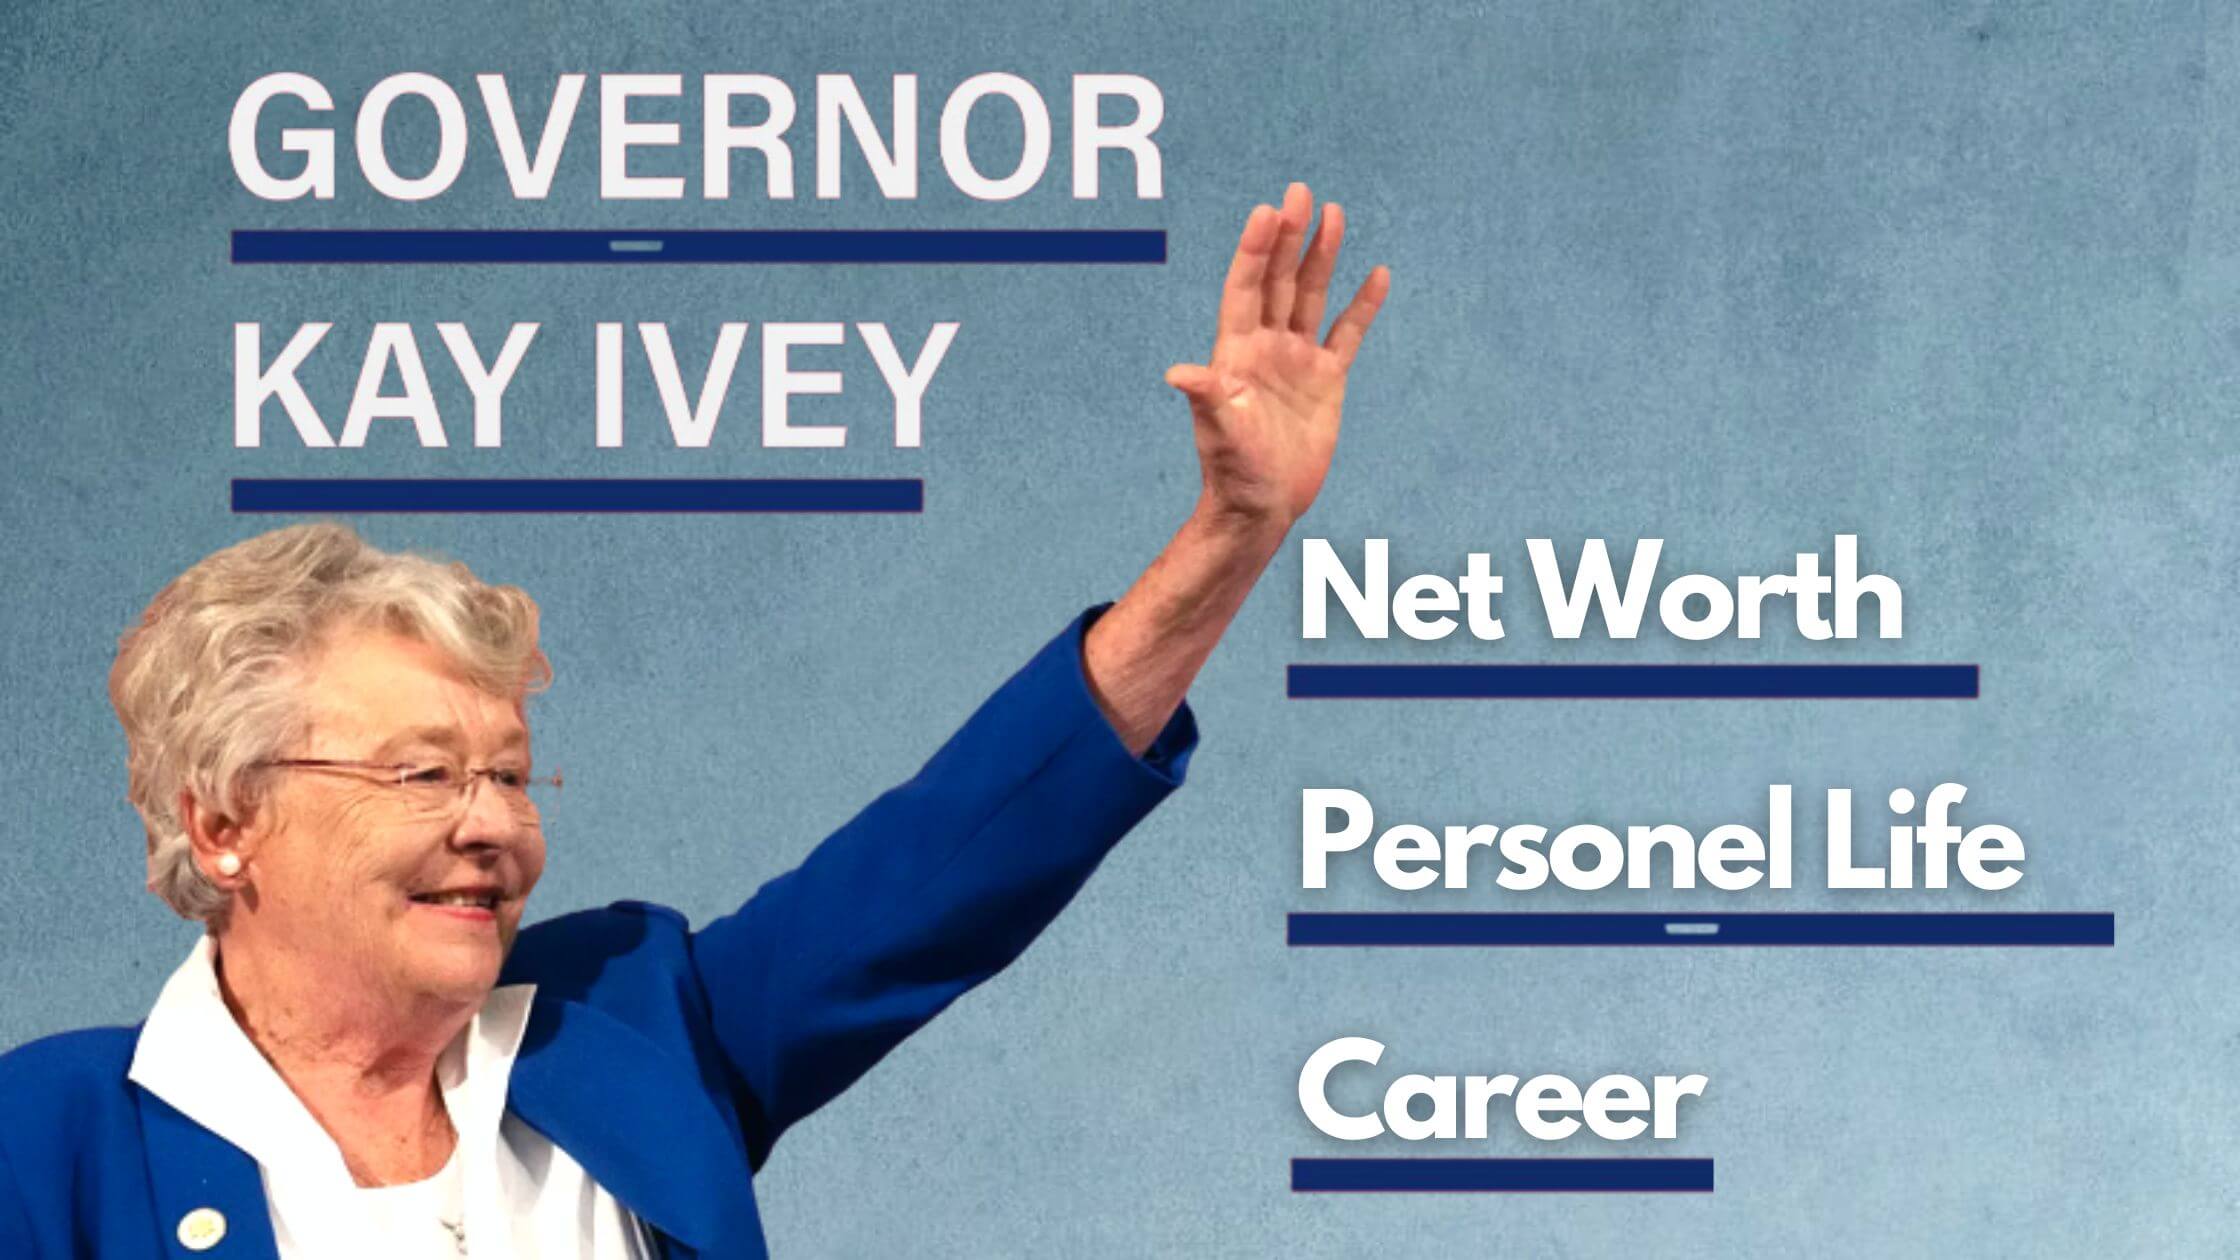 Kay Ivey The Successful Politician's Net Worth, Husband, Career